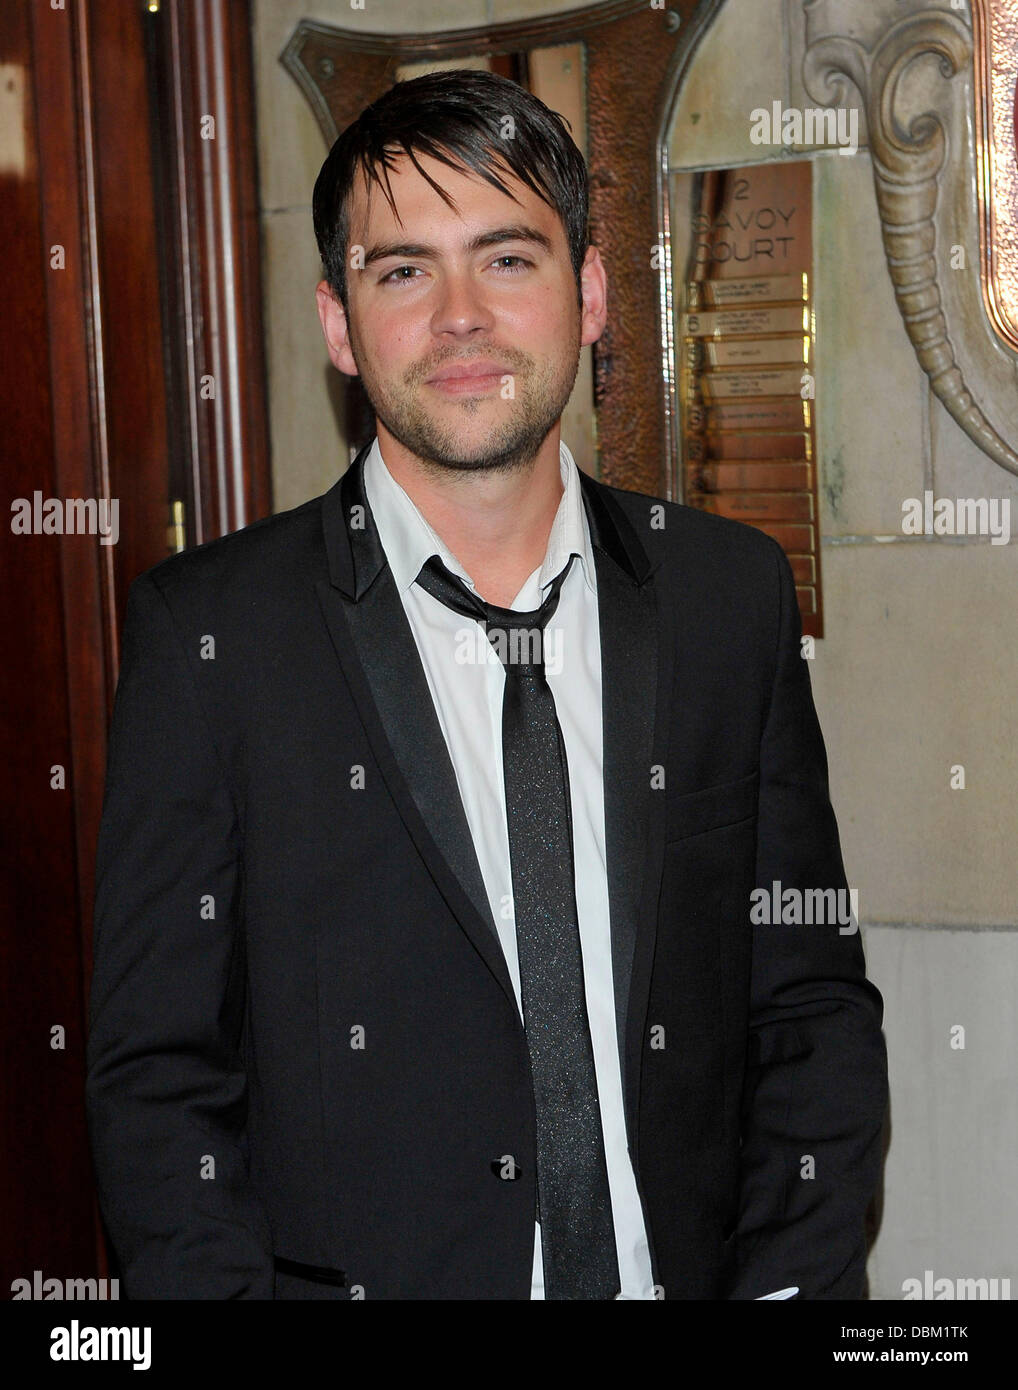 Bruno Langley Legally Blonde the Musical - press night held at the Savoy theatre London, England - 13.07.11 Stock Photo